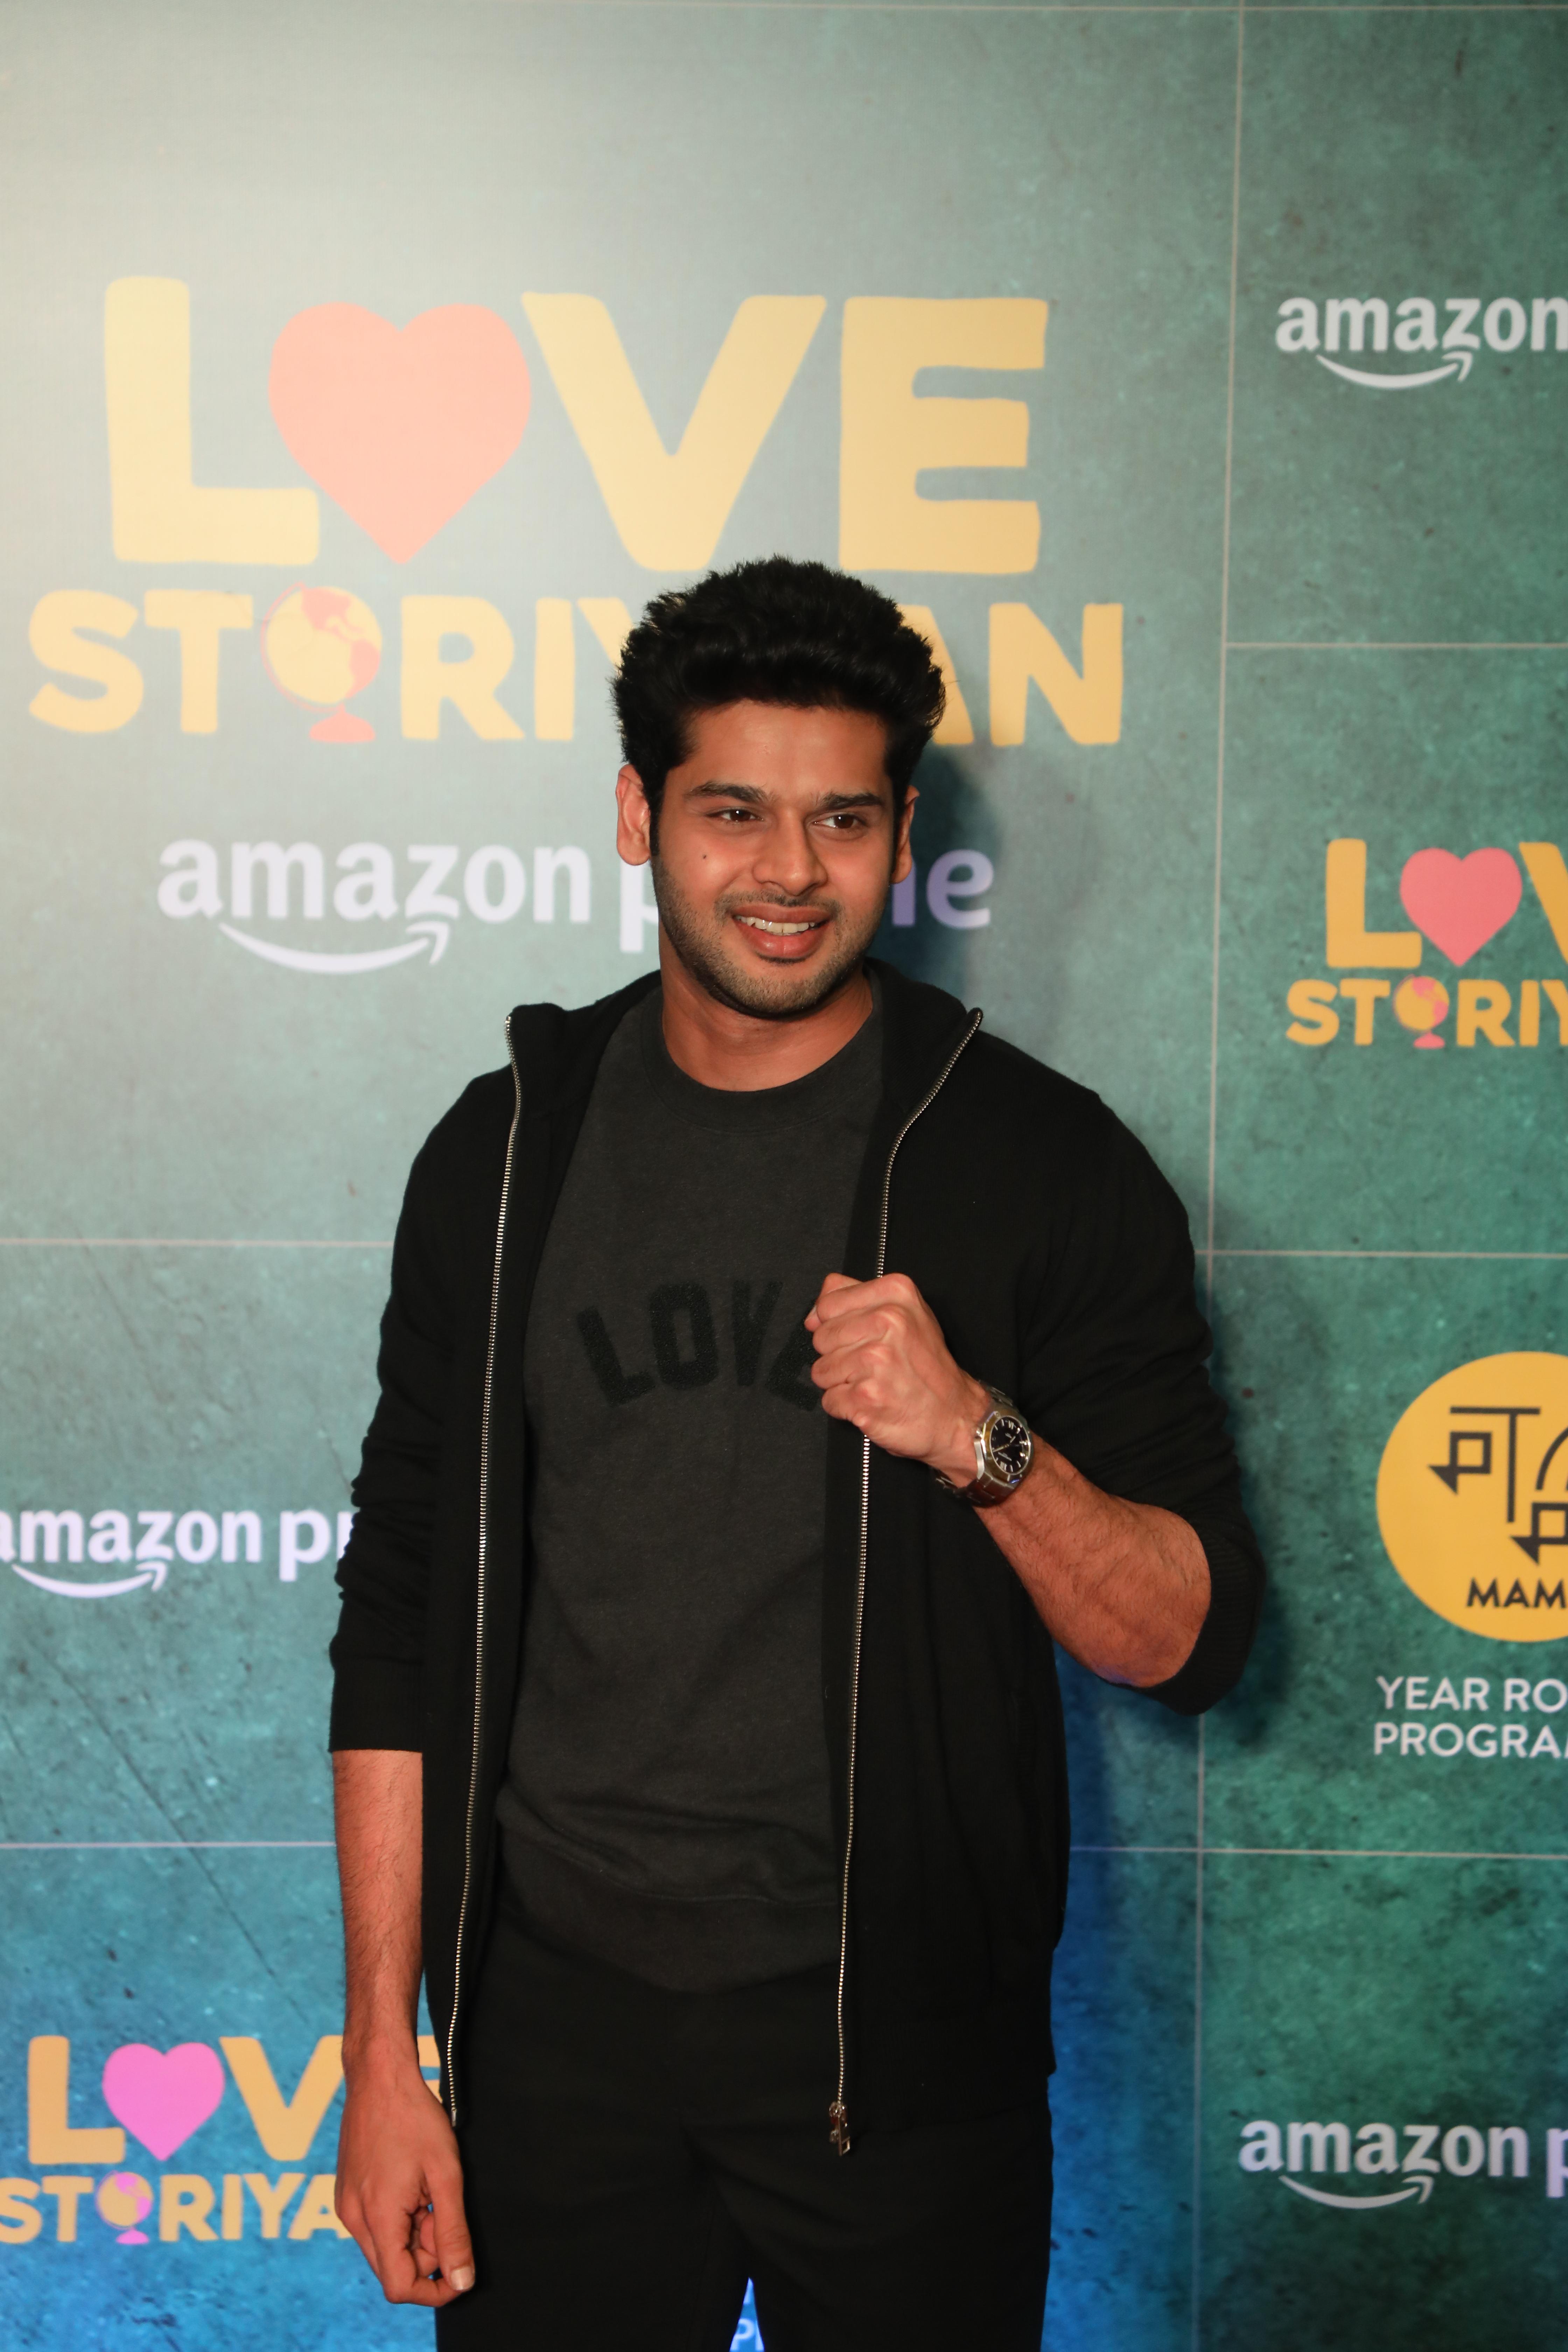 Actor Abhimayu Dassani poses at the screening of Love Storiyaan, which was held in Mumbai on Monday